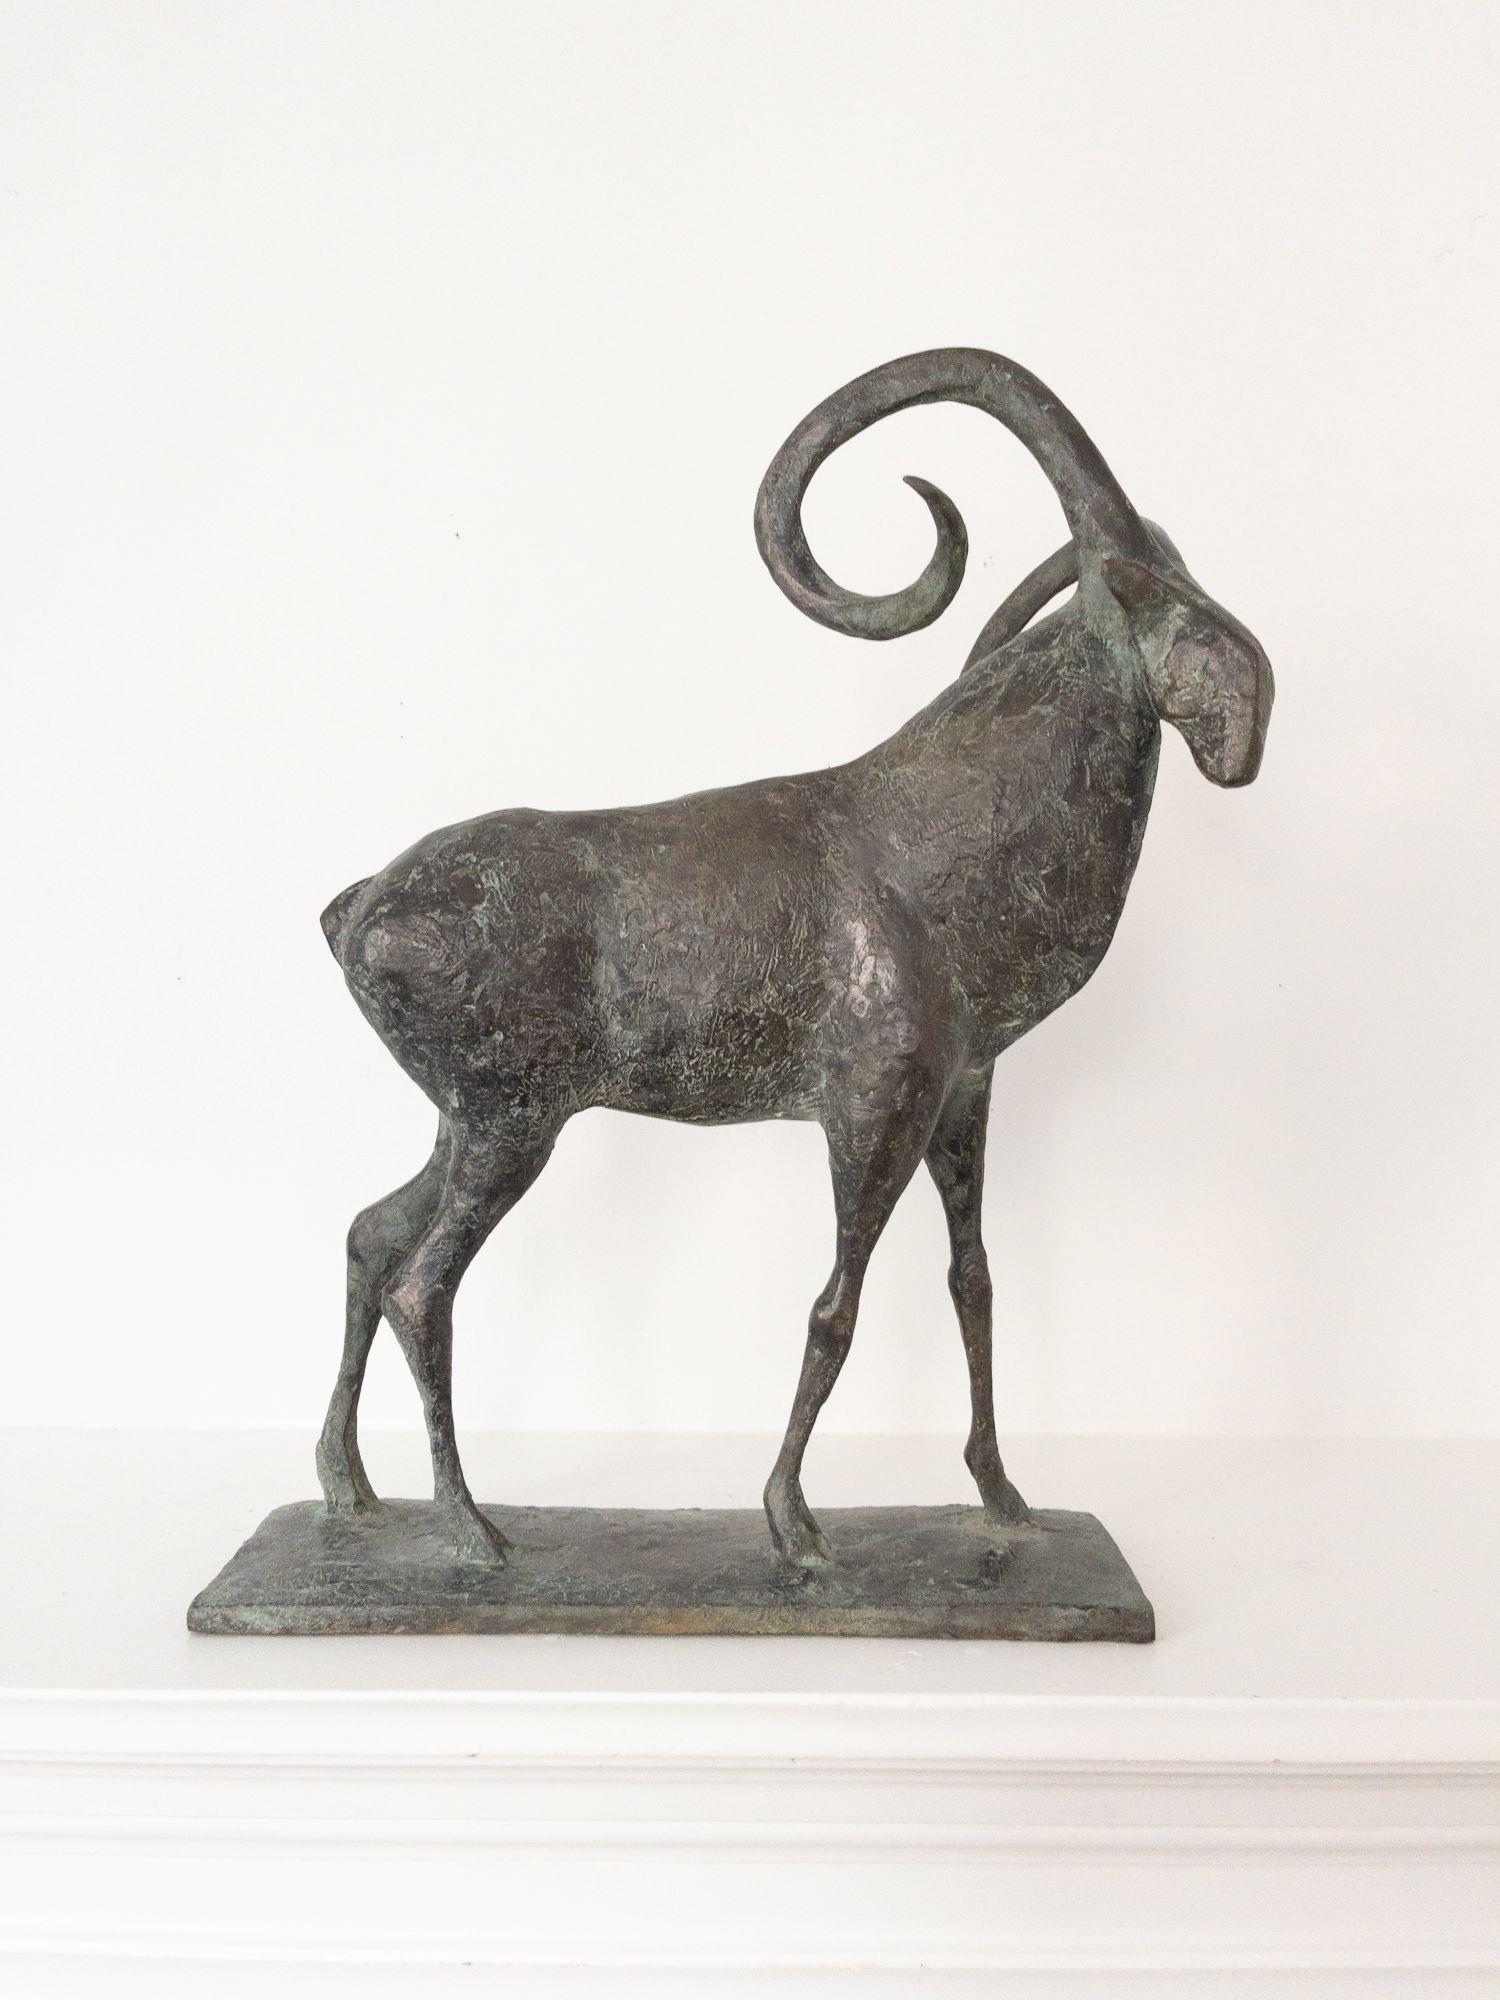 Mouflon I is a bronze sculpture by French contemporary artist Pierre Yermia, dimensions are 55 × 45 × 23 cm (21.7 × 17.7 × 9.1 in). 
The sculpture is signed and numbered, it is part of a limited edition of 8 editions + 4 artist’s proofs, and comes